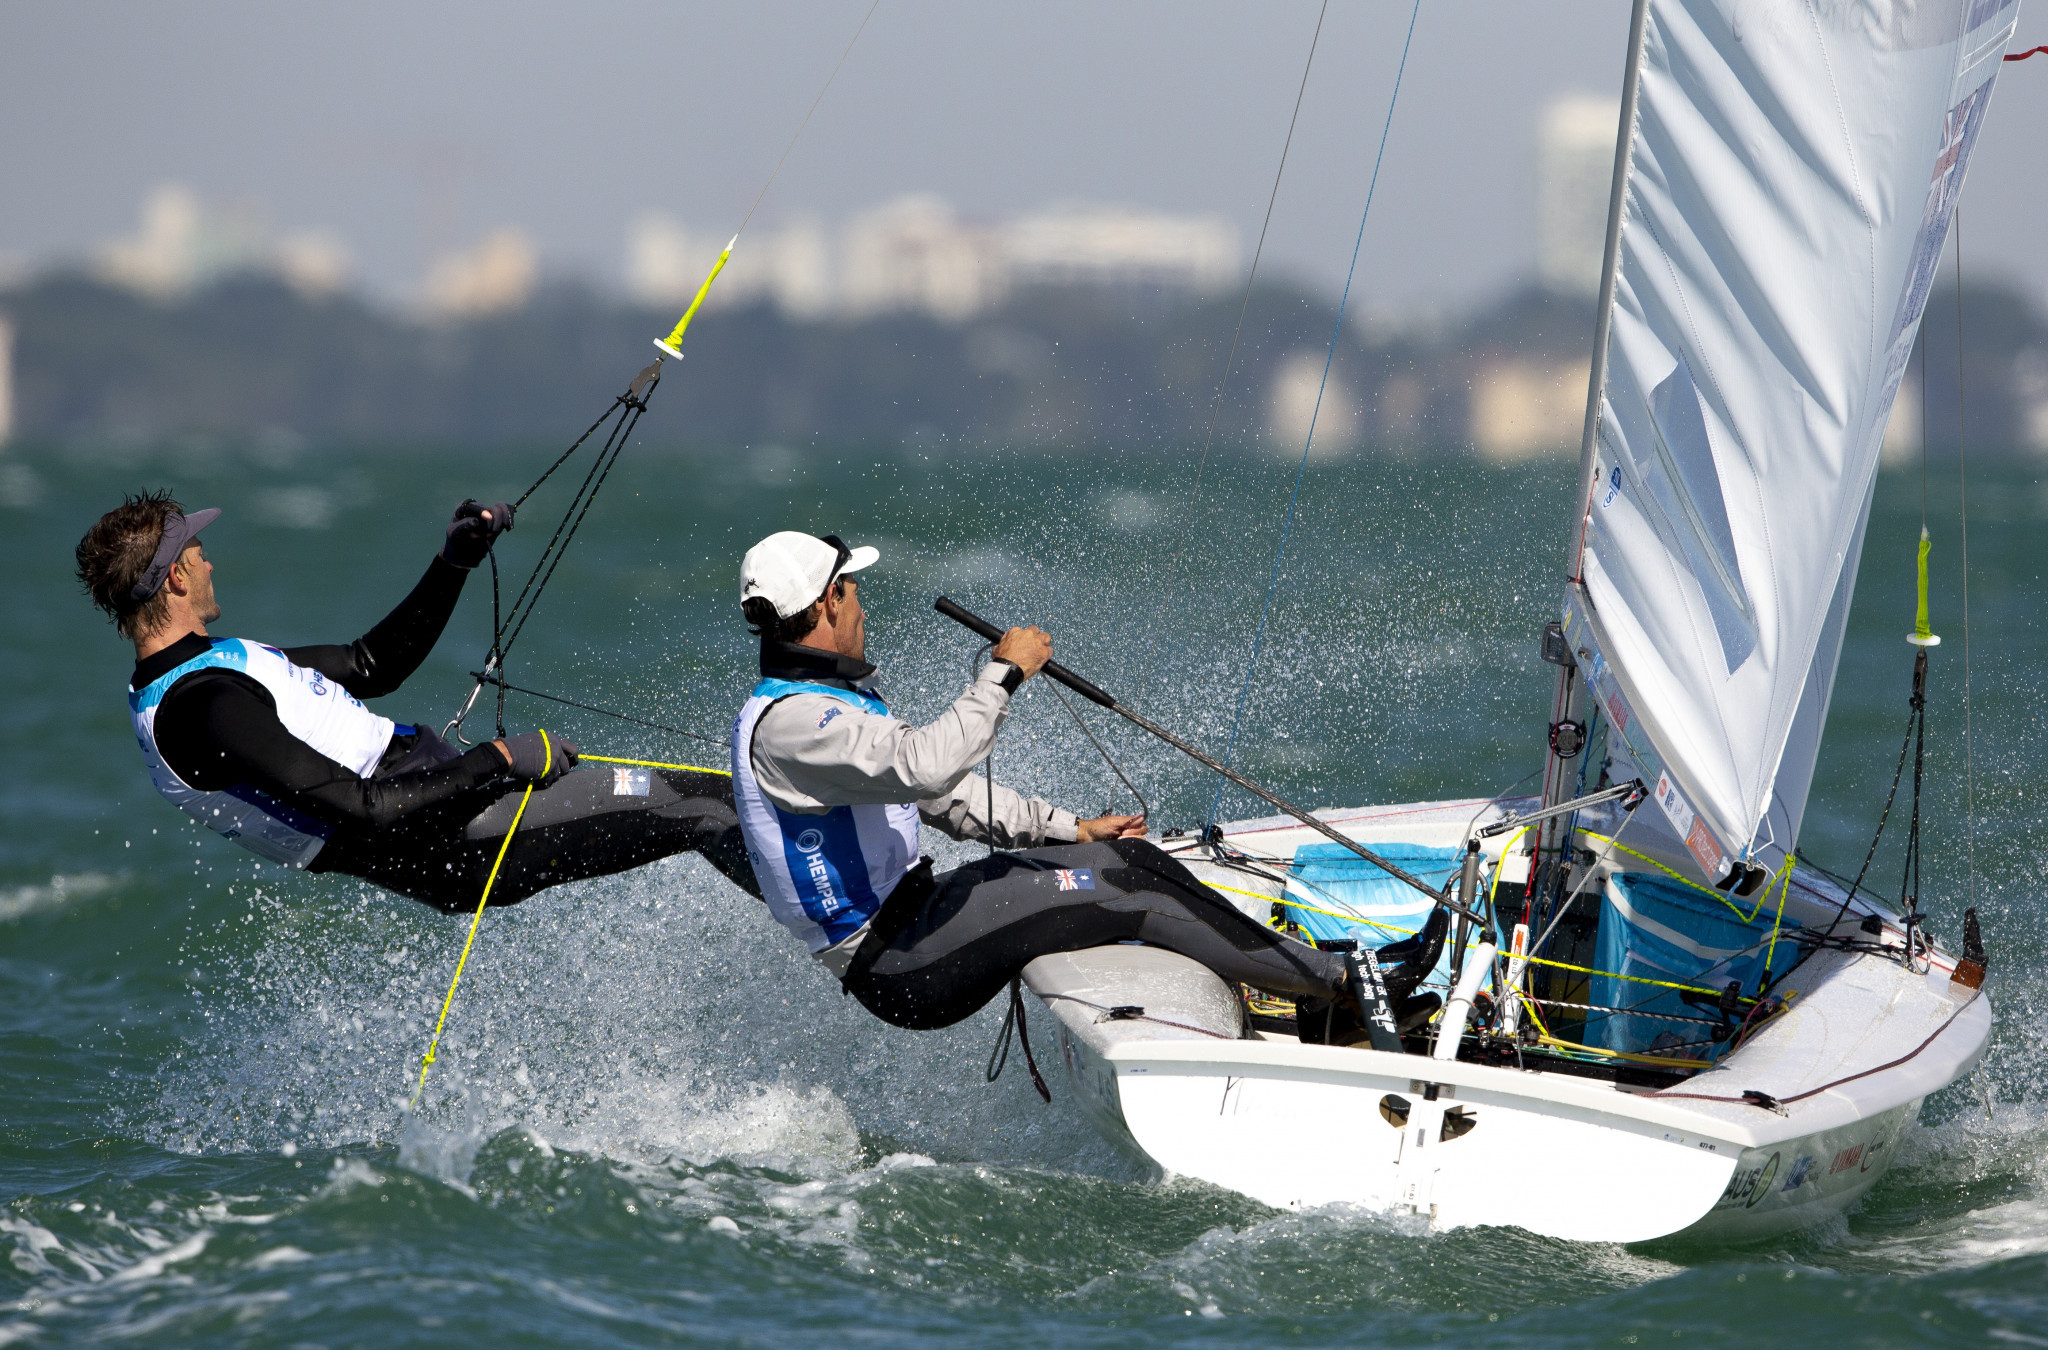 Olympic silver medallists move into men's 470 lead at Sailing World Cup in Miami